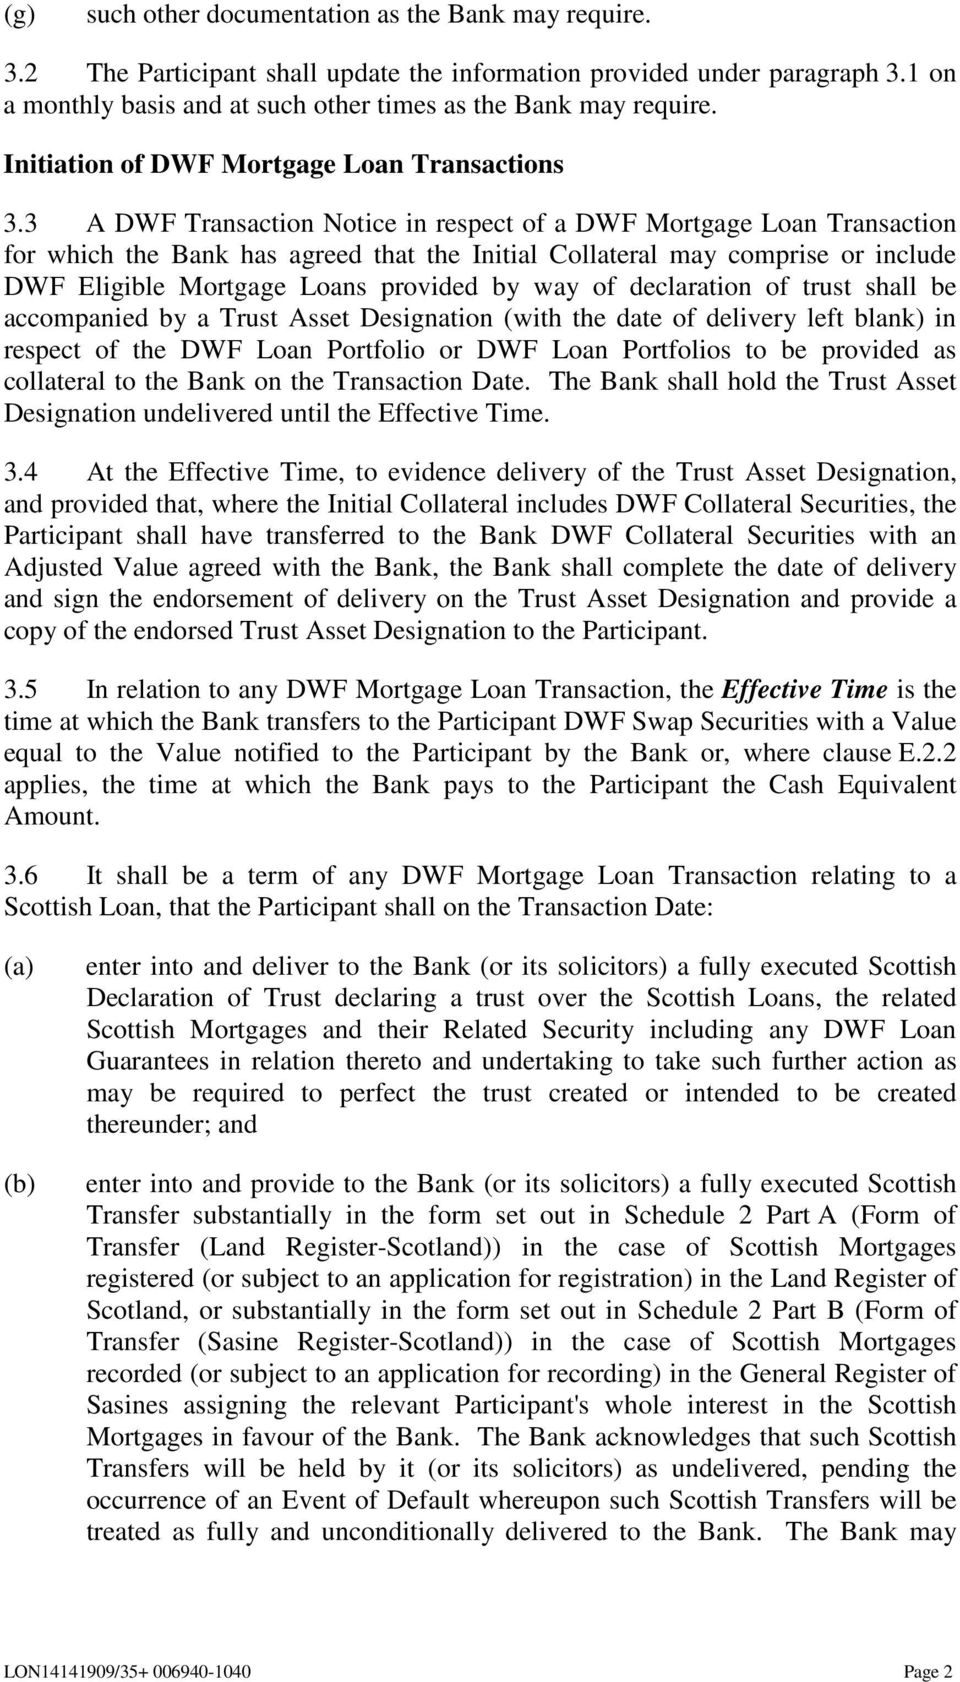 3 A DWF Transaction Notice in respect of a DWF Mortgage Loan Transaction for which the Bank has agreed that the Initial Collateral may comprise or include DWF Eligible Mortgage Loans provided by way